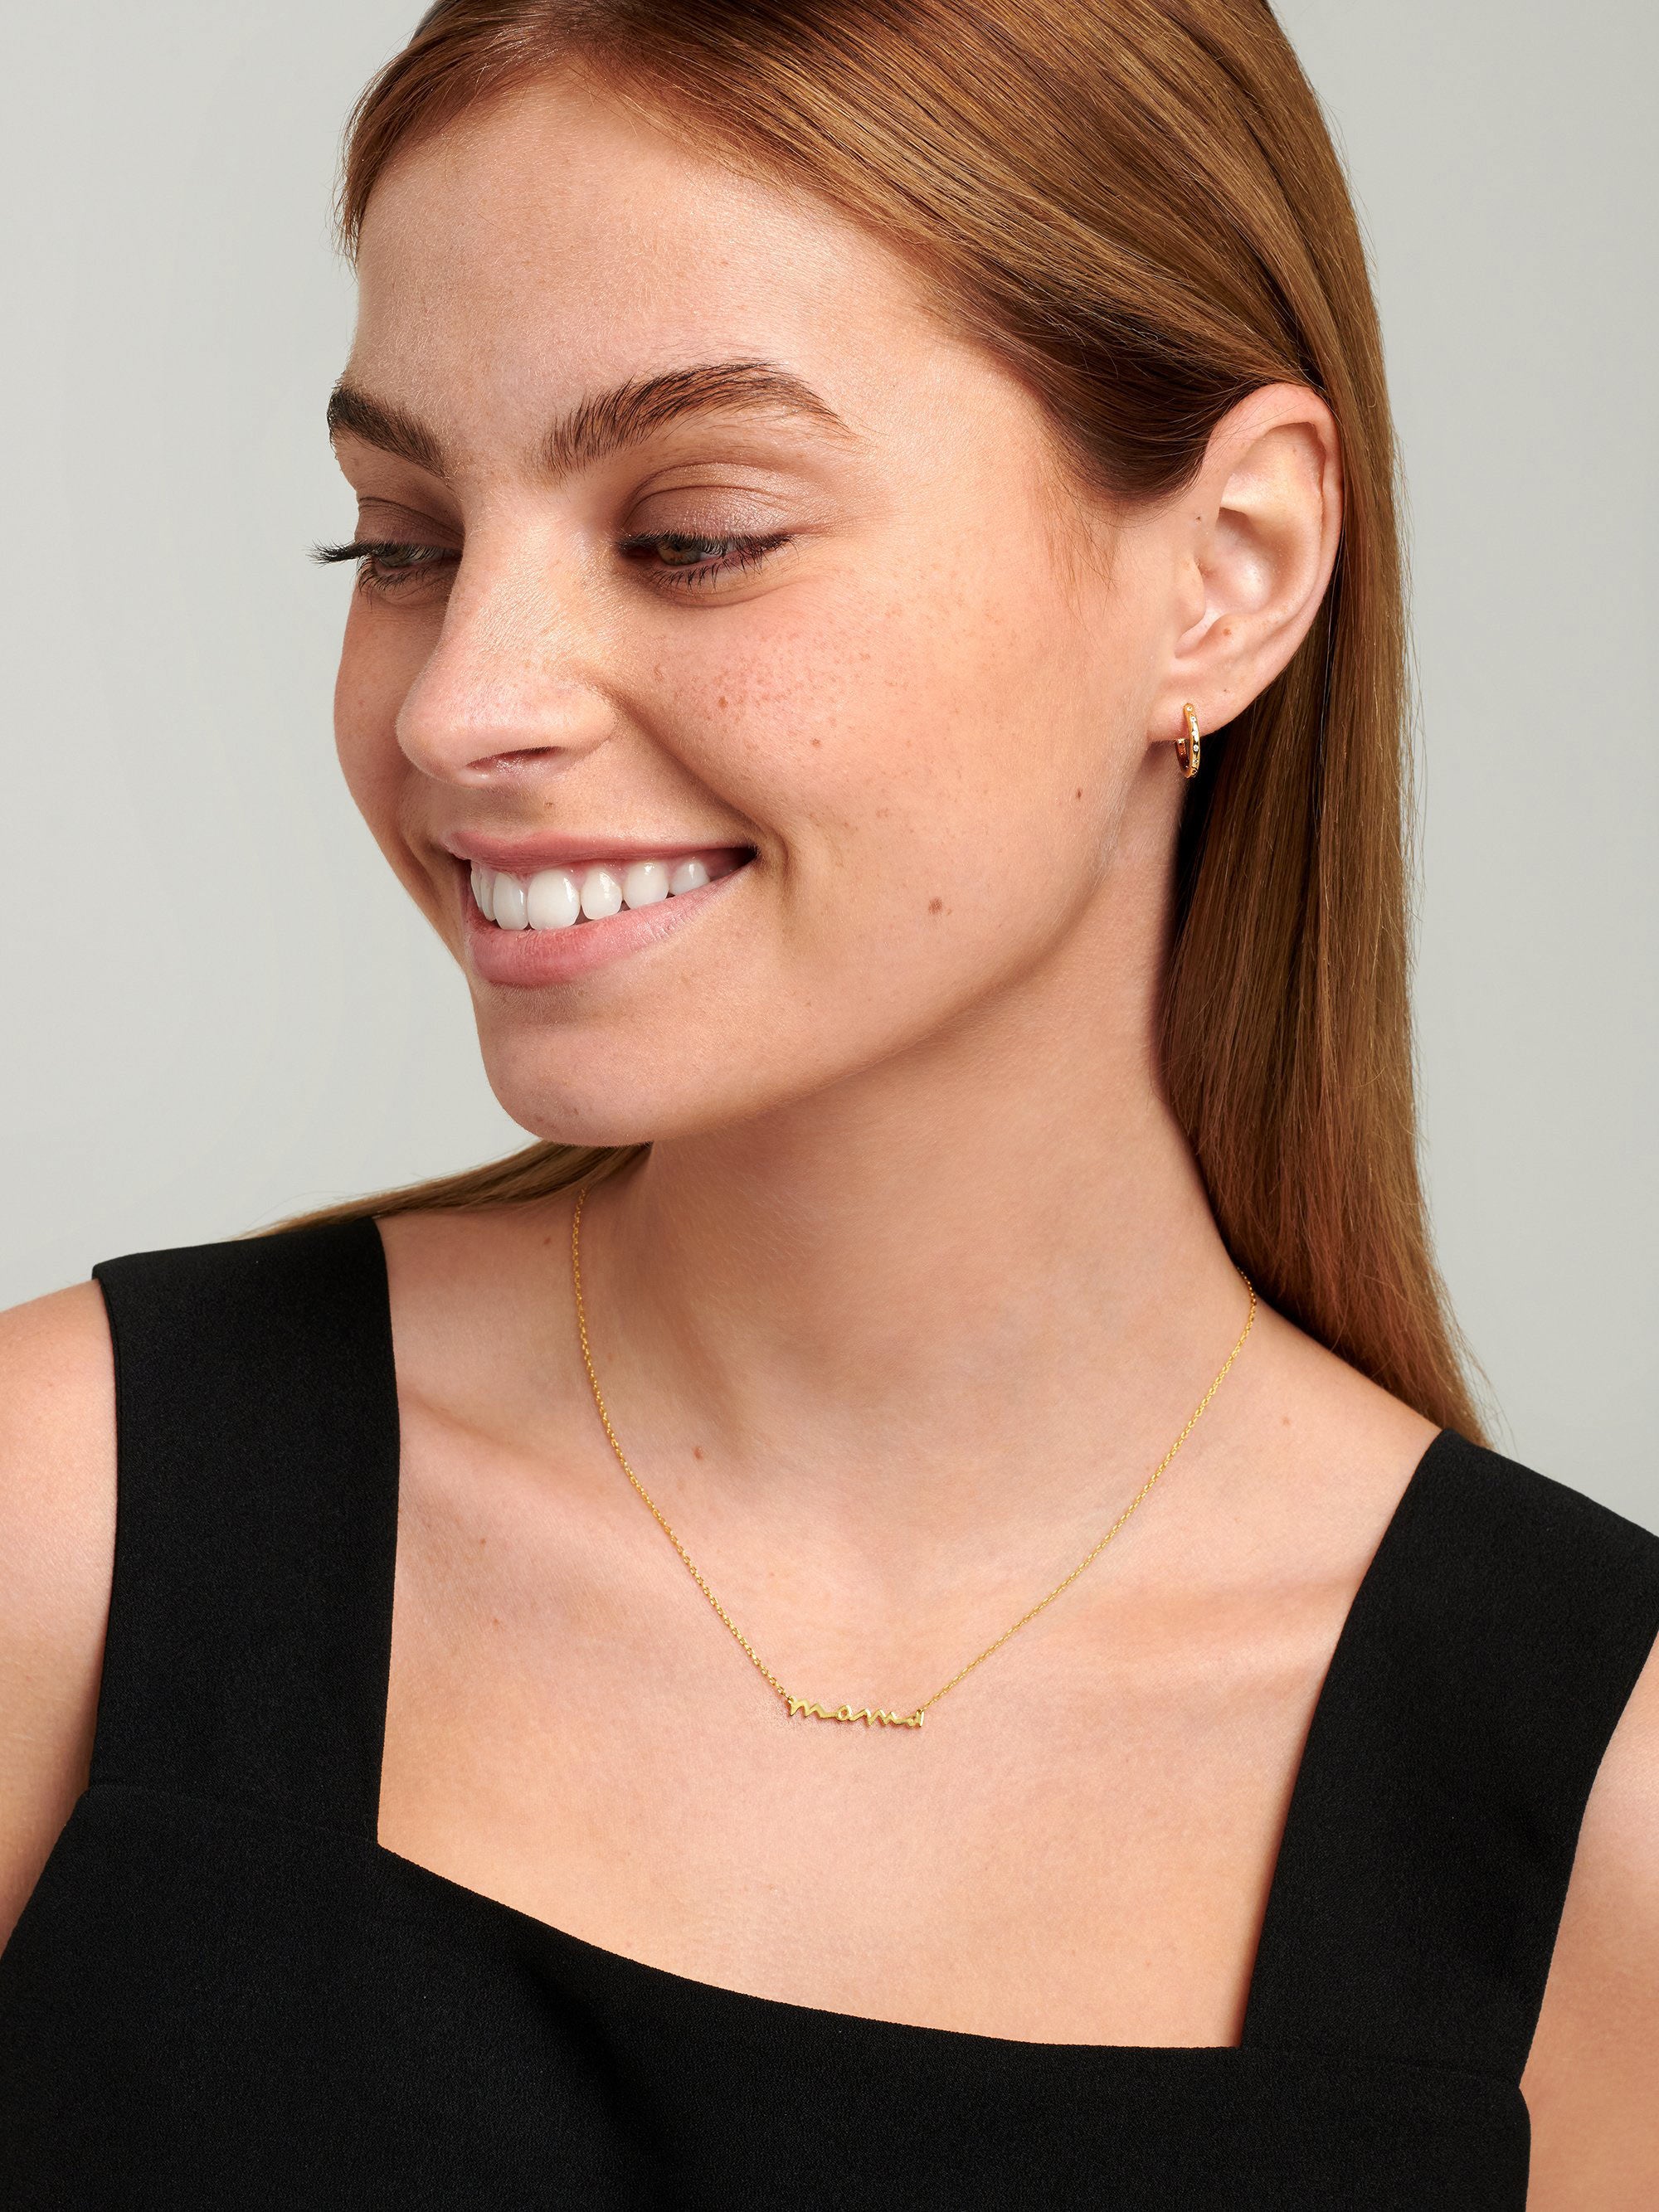 Model wearing gold mama necklace.